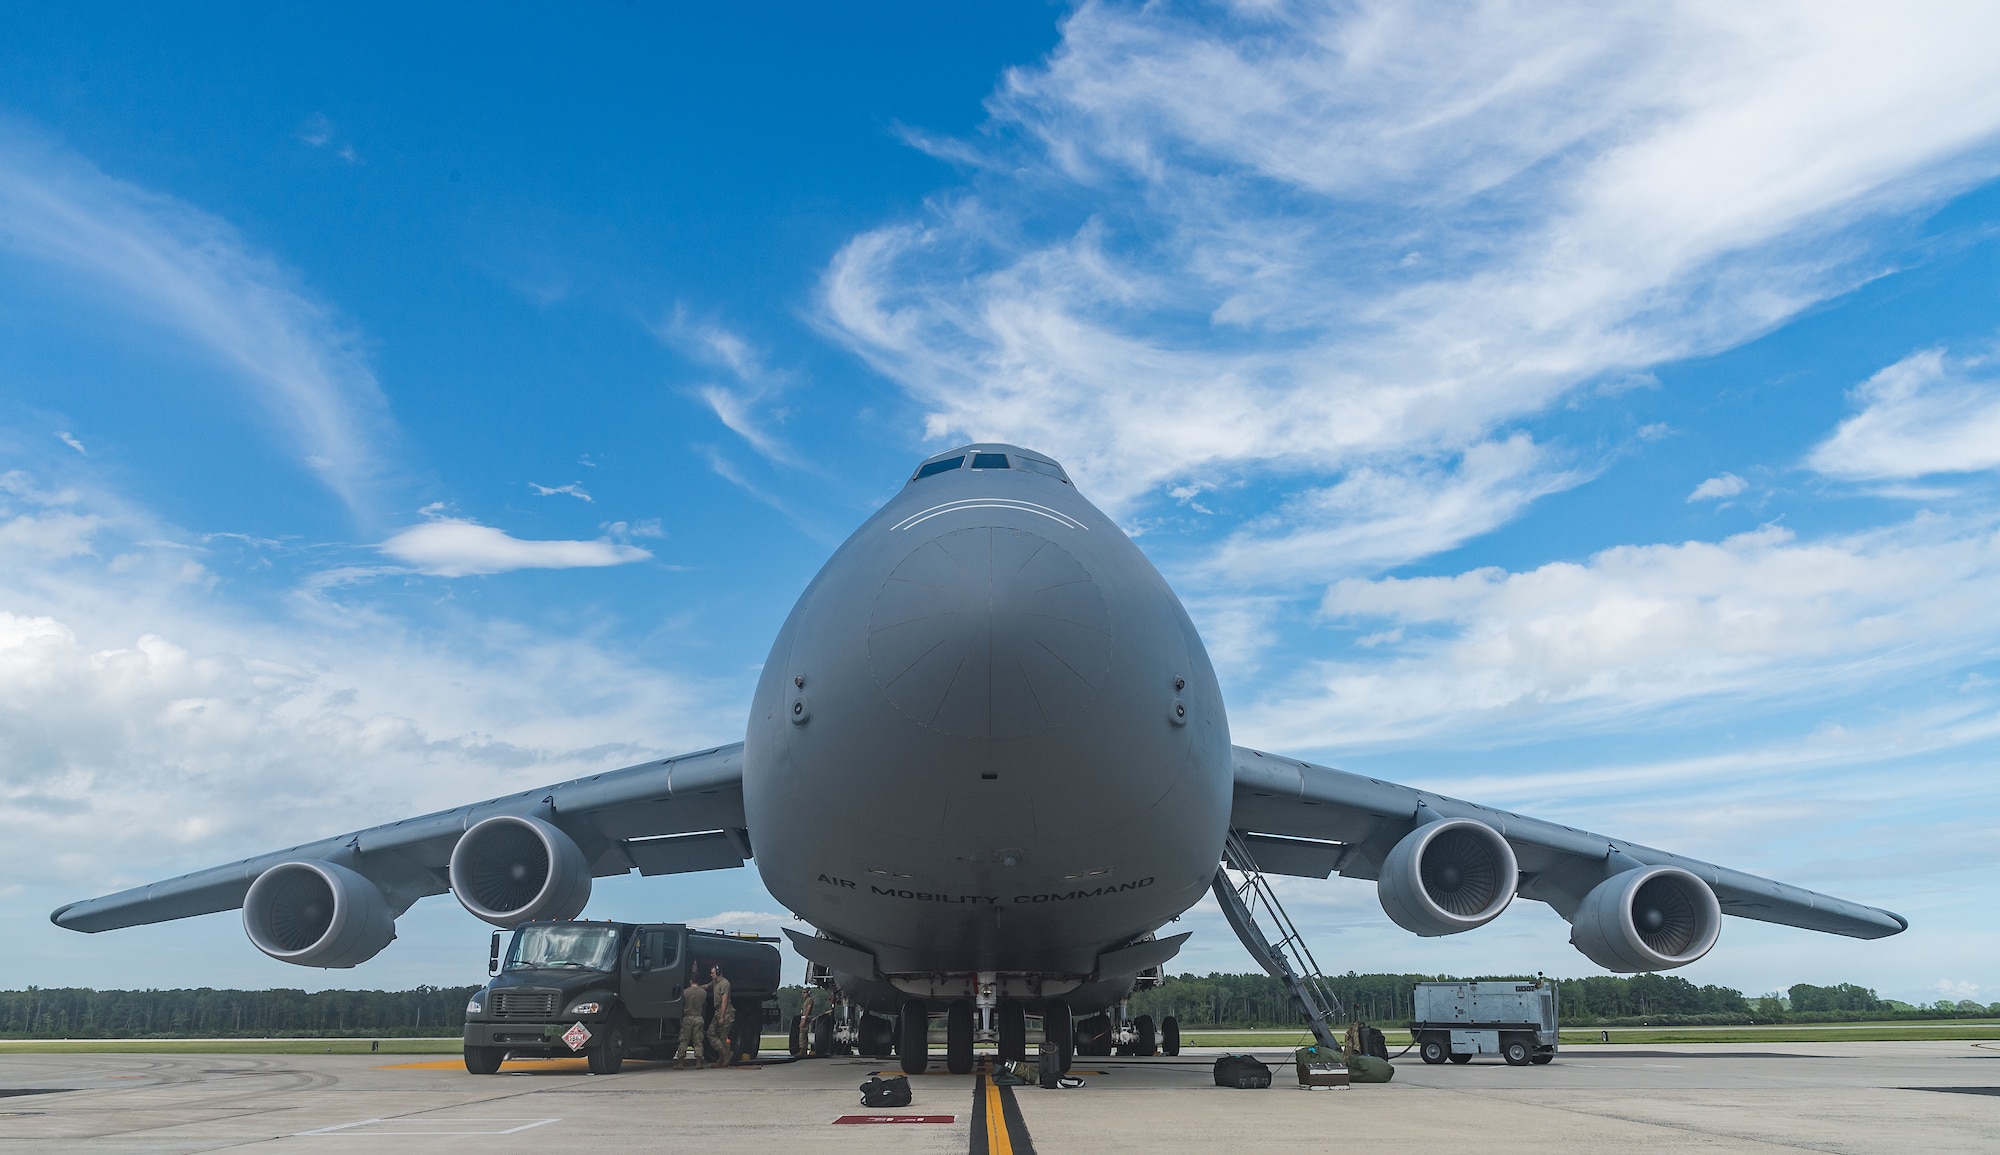 Personnel from the 436th Aircraft Maintenance and 436th Logistics Readiness Squadrons refuel a C-5M Super Galaxy prior to its departure from Dover Air Force Base, Delaware, Aug. 18, 2021. The C-5M is a strategic transport aircraft and is the largest aircraft in the U.S. Air Force inventory. (U.S. Air Force photo by Roland Balik)